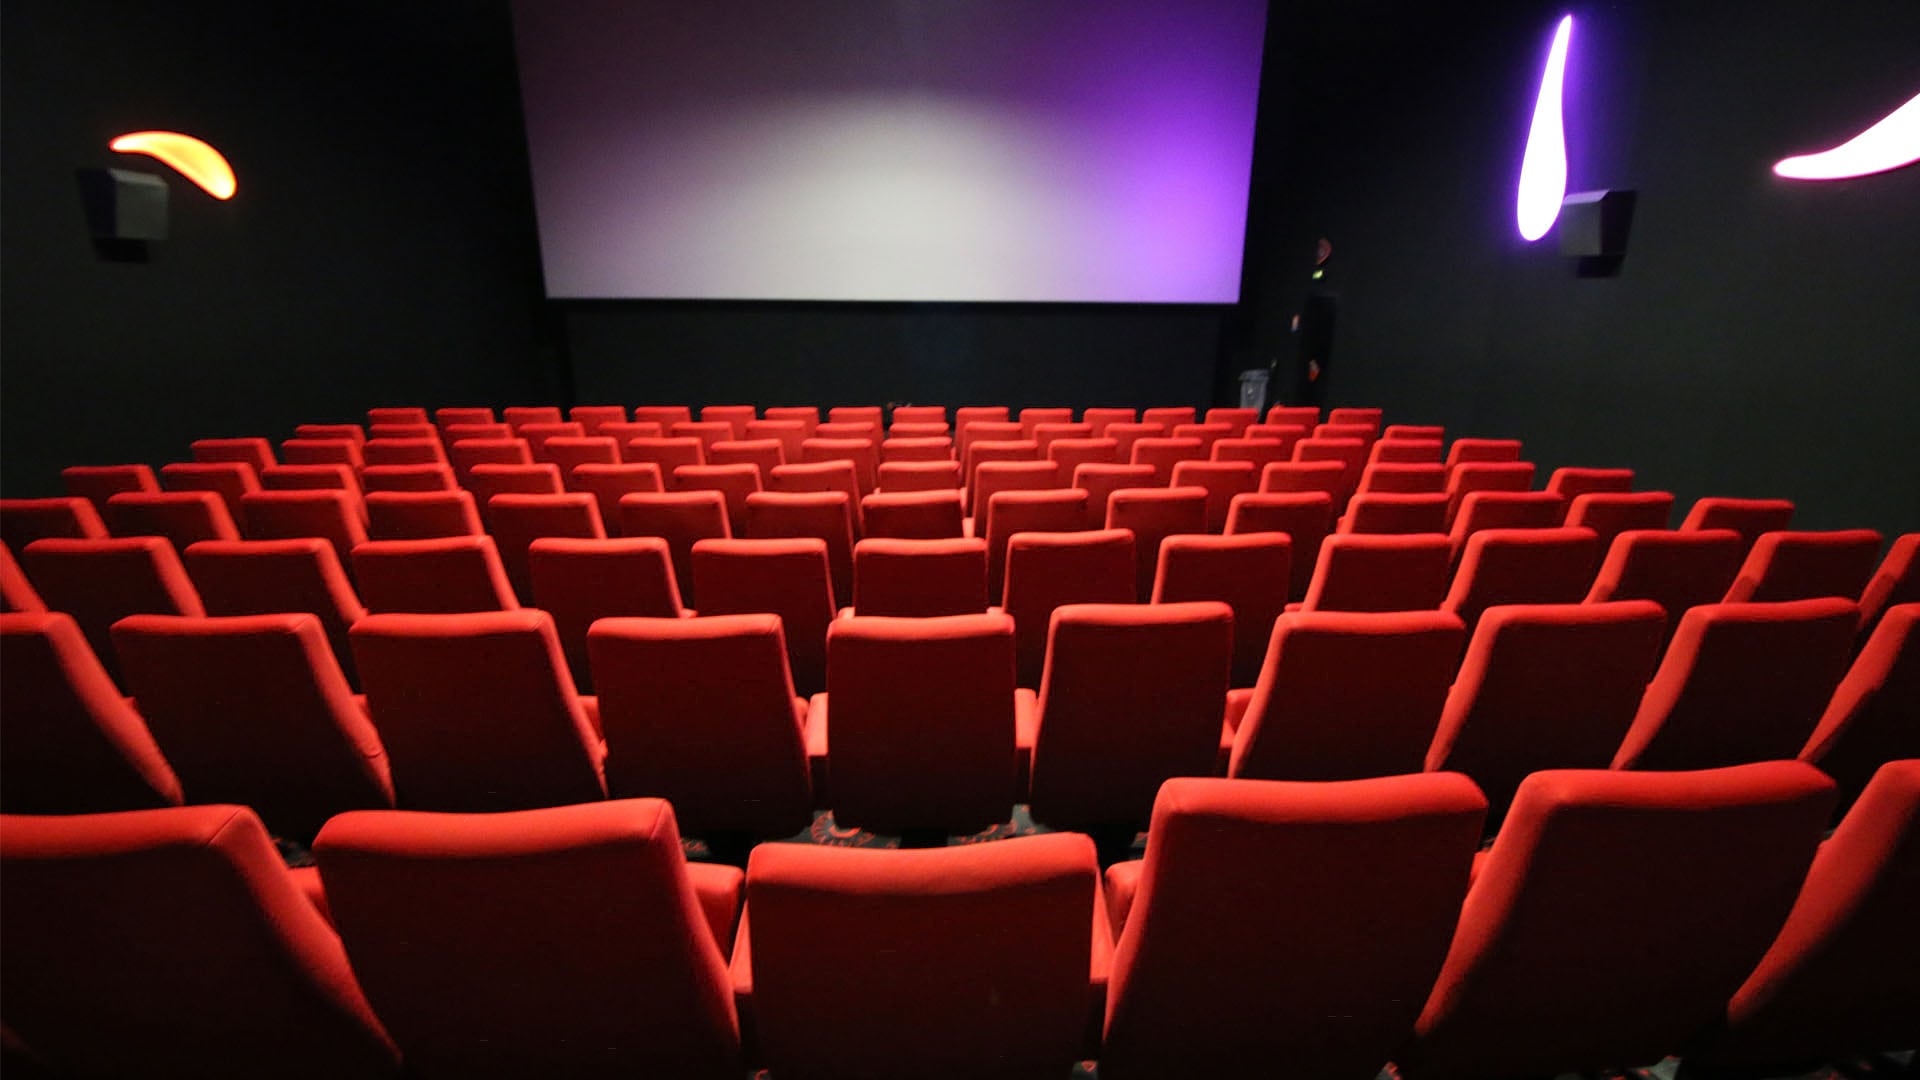 A movie theater could now be a venue for AI and data analytics